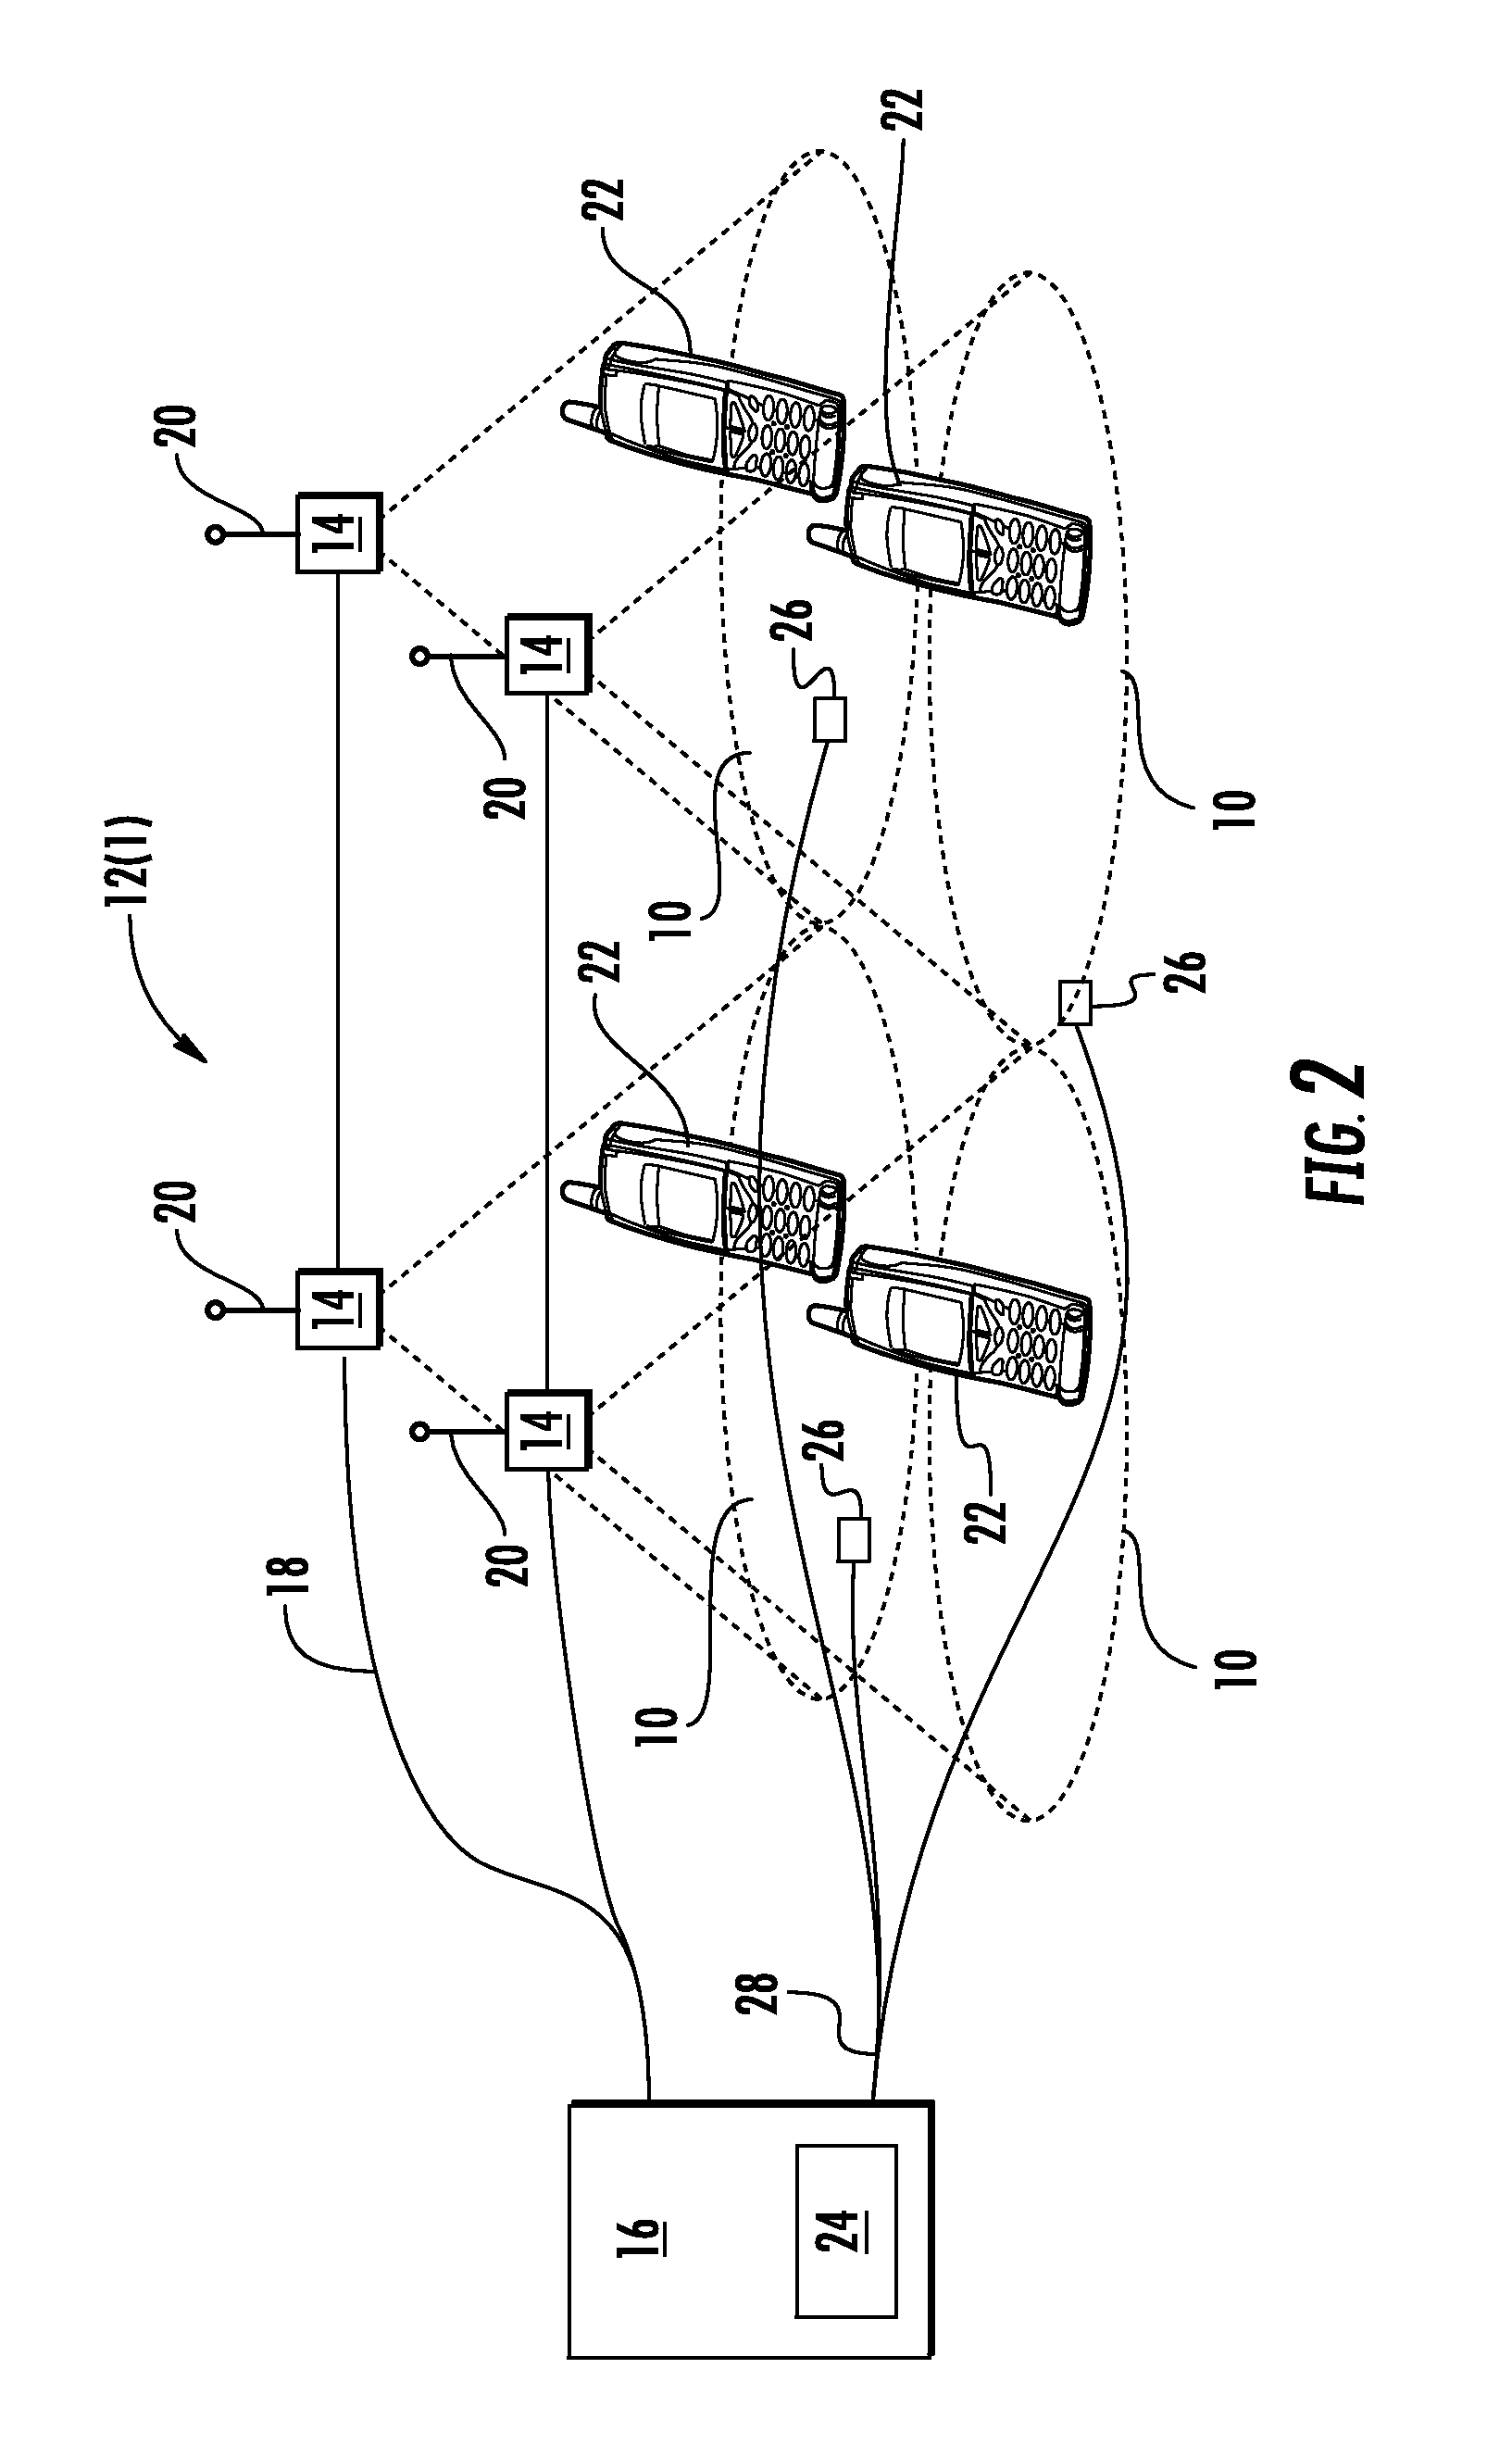 Power management in distributed antenna systems (DASs), and related components, systems, and methods